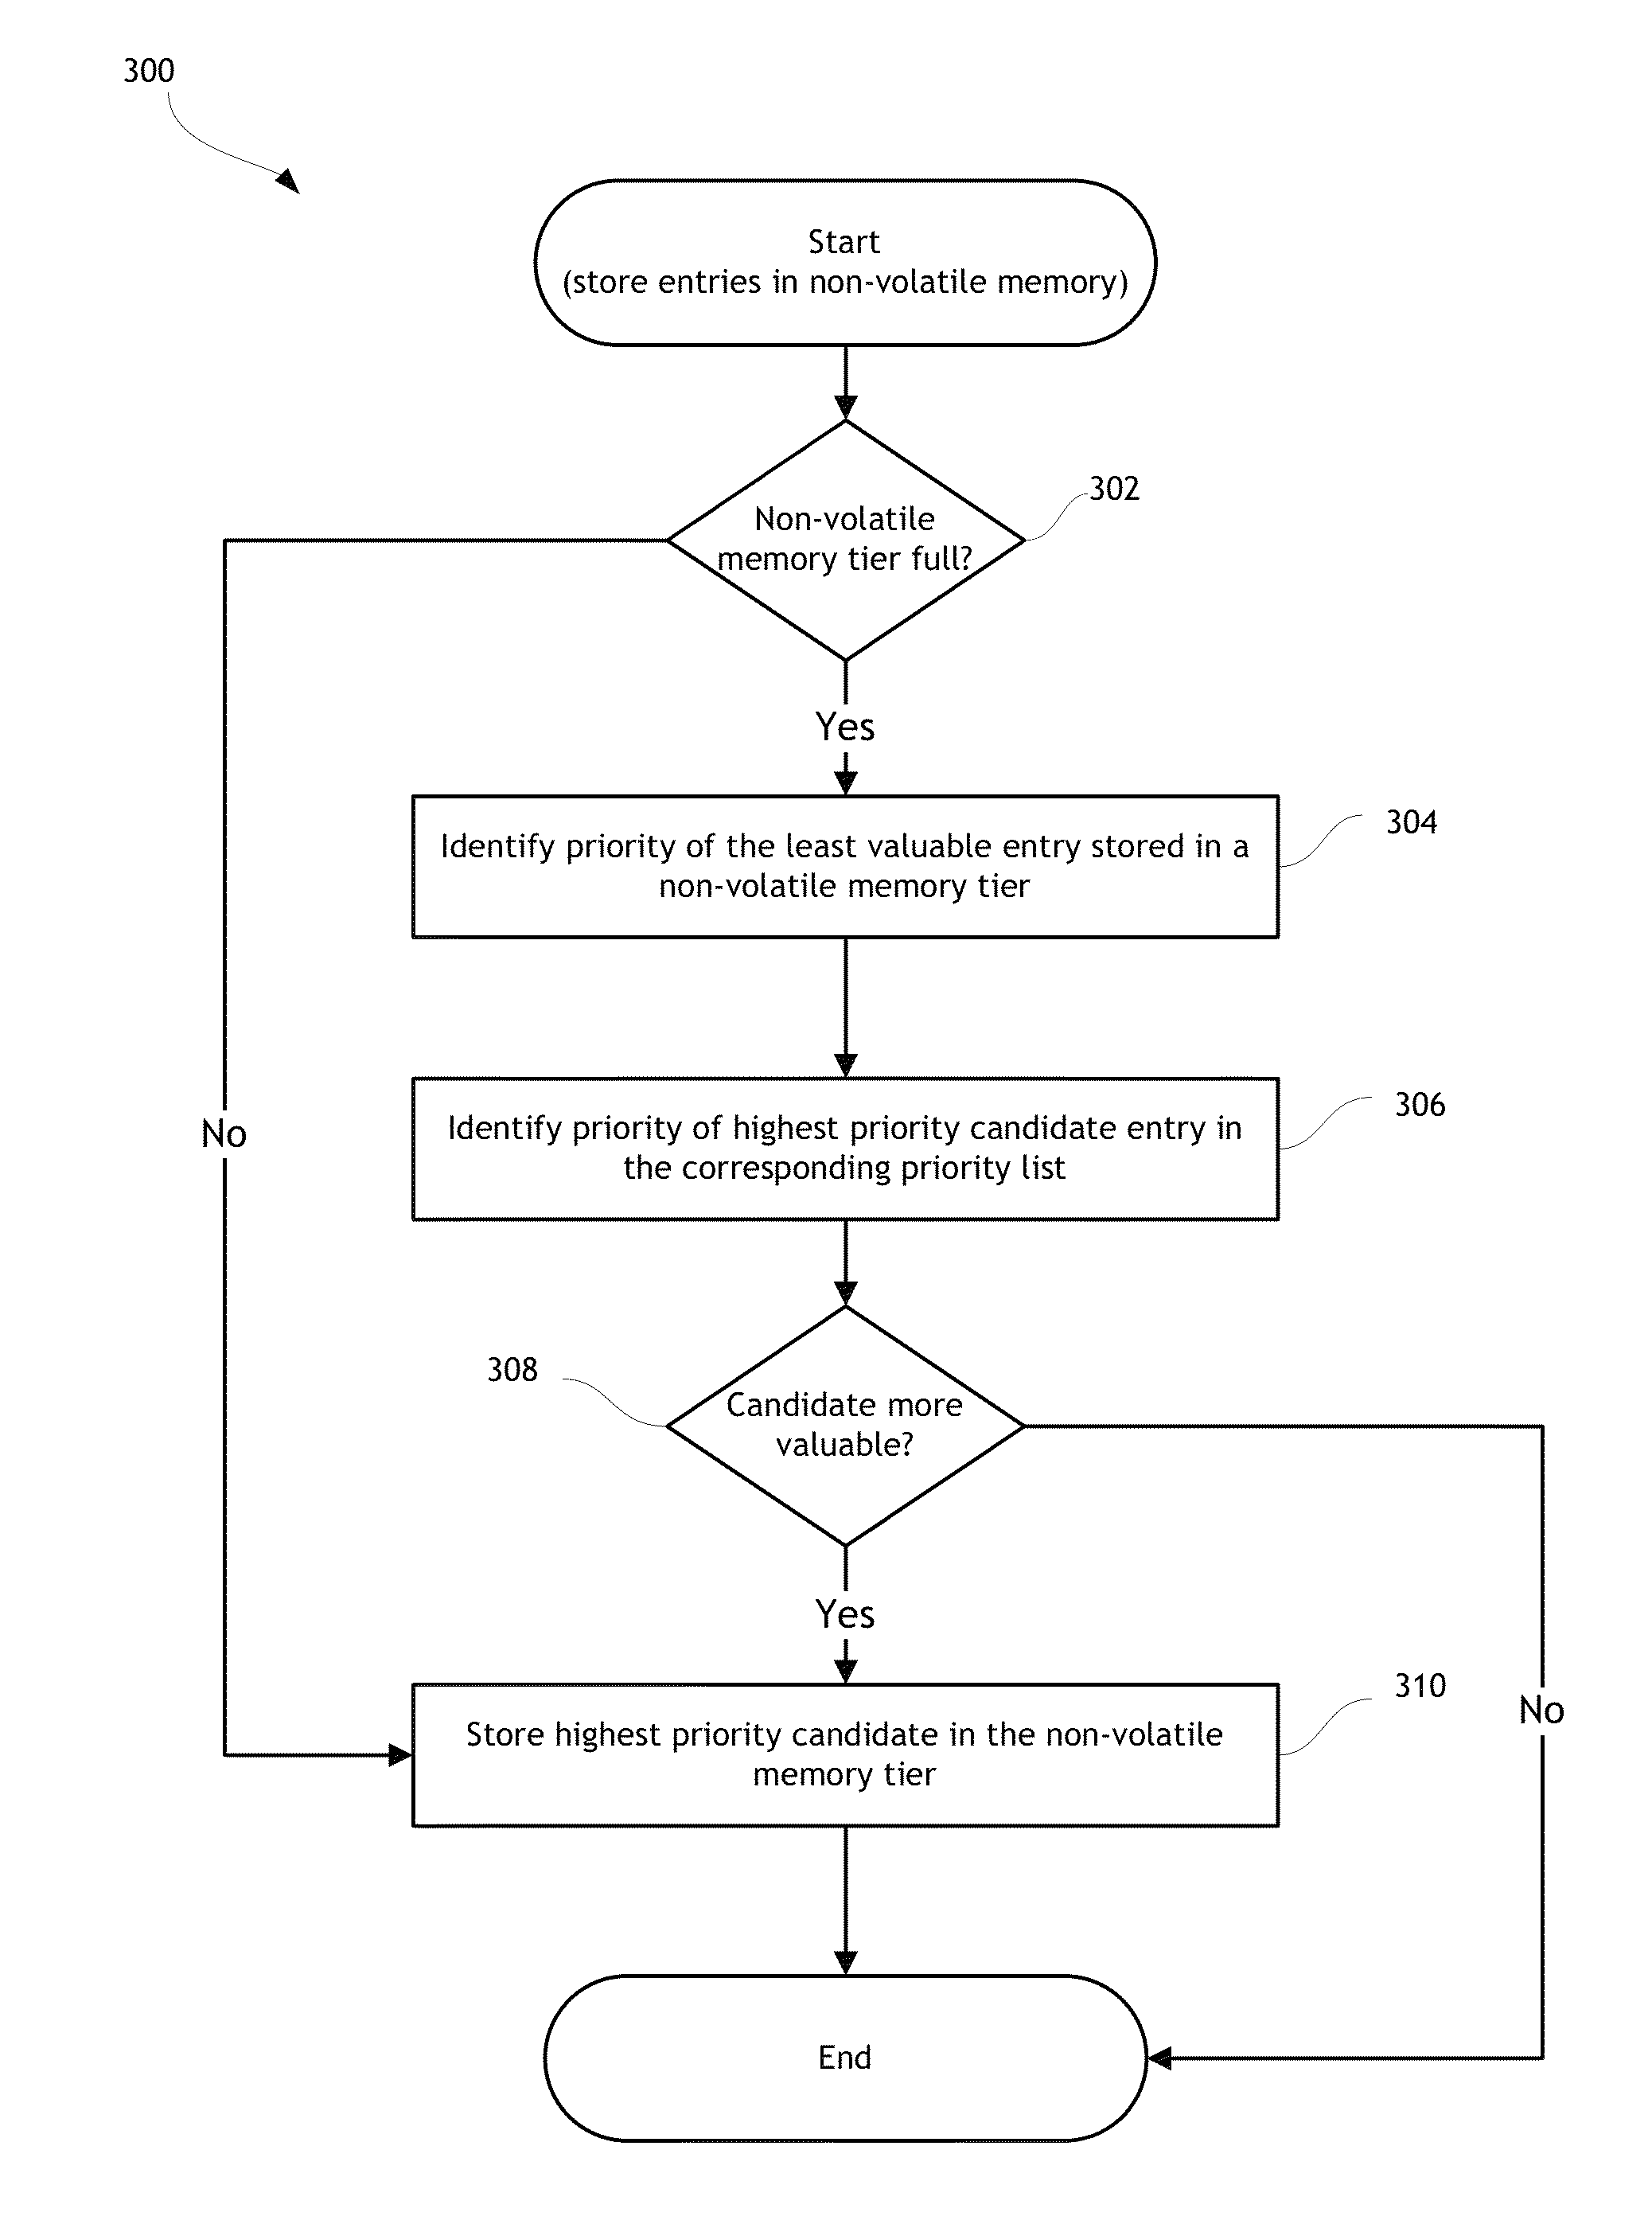 Disk drive data caching using a multi-tiered memory